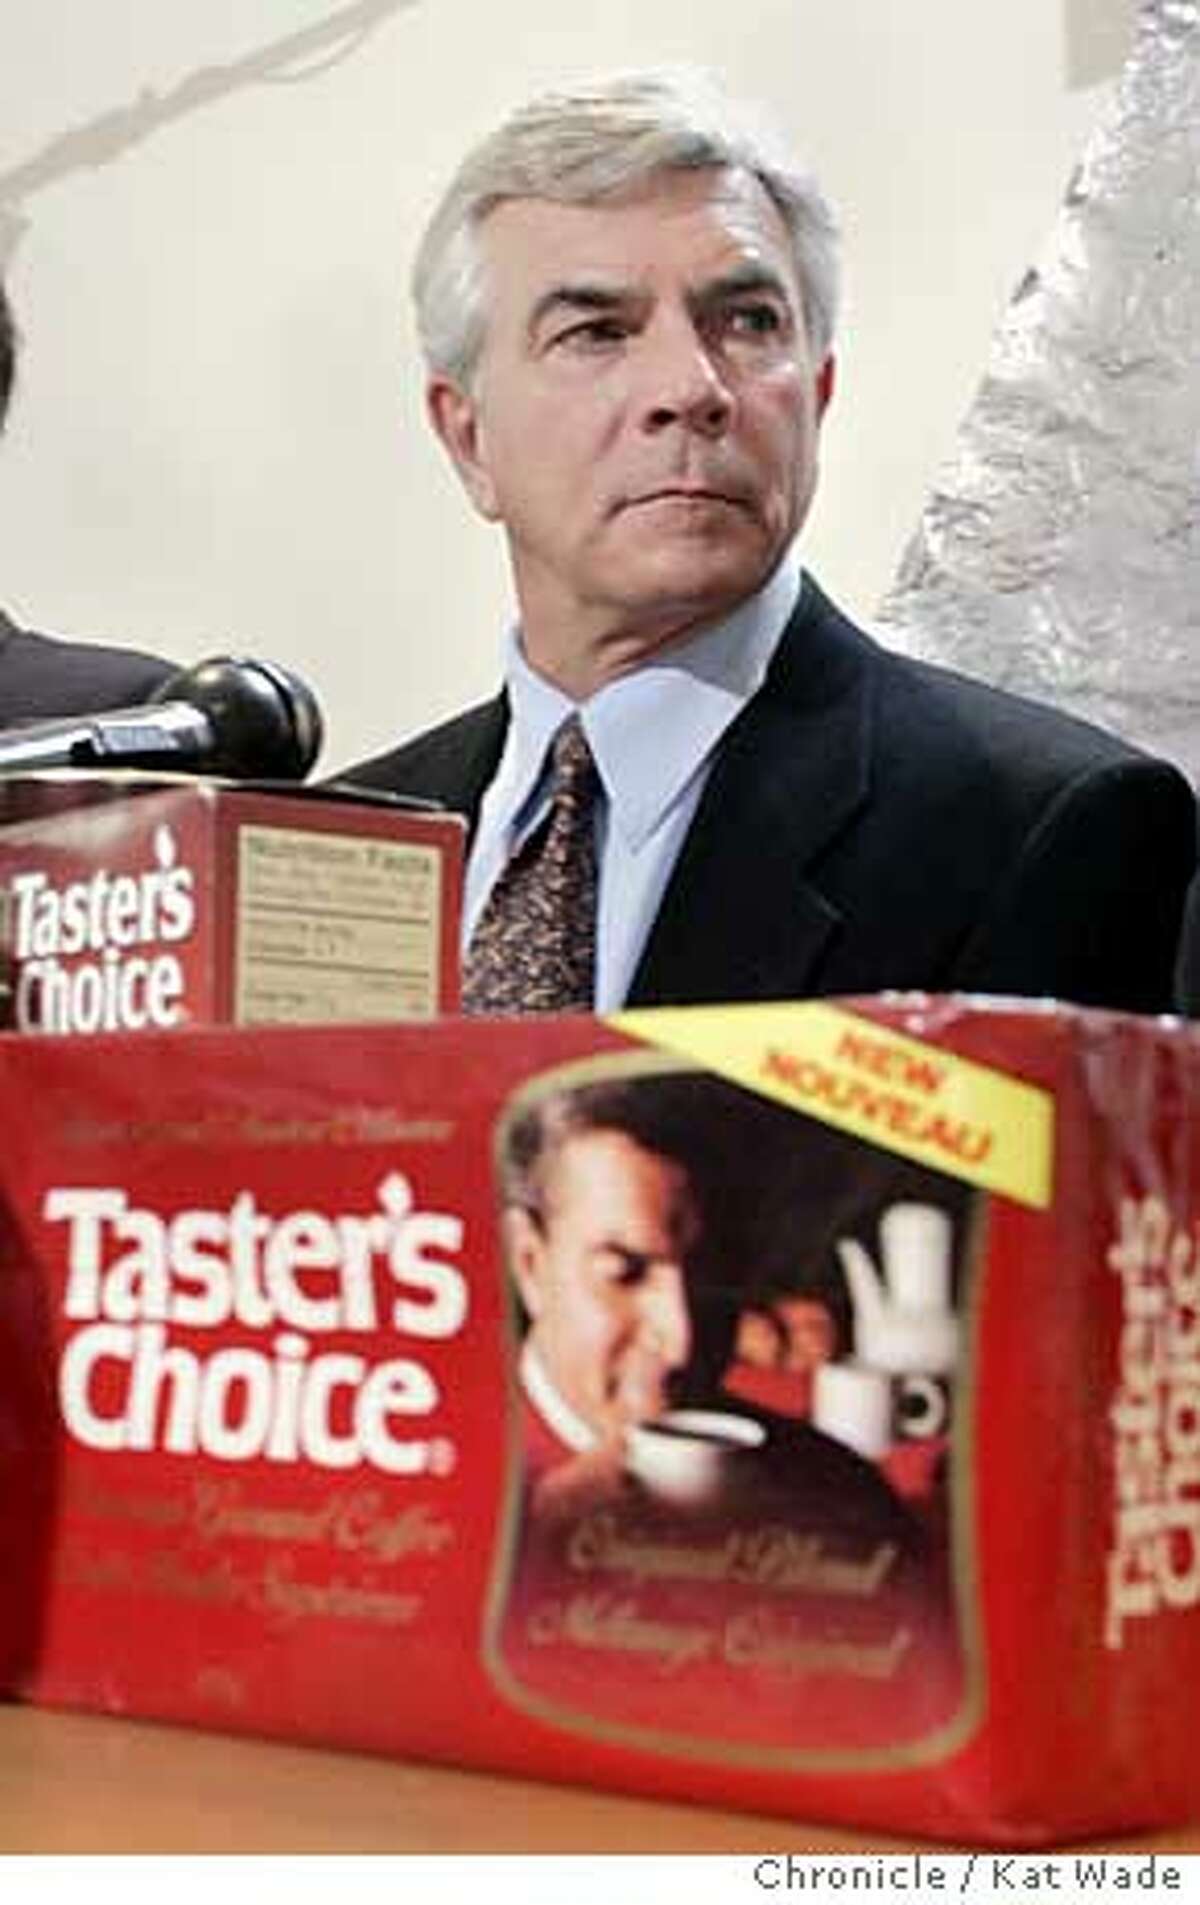 MILLIONAIRE_053_KW.jpg On 2/1/05 in San Francisco Antioch kindergarten teacher and former actor/model Russell Christoff who was recently awarded $15.6 million dollars when a Los Angeles jury ruled the Nestle USA used his likeness-taken during a 1986 photo shoot-without permission and profited from it, holds a press conference with his lawyer Colin C. Claxon. The brick of canadian Taster's choice coffee was the original purpose of the photo which then ended up on jars of Nestle USA coffee sold in several countries. Kat Wade / The Chronicle MANDATORY CREDIT FOR PHOTOG AND SF CHRONICLE/ -MAGS OUT Ran on: 02-02-2005 Russell Christoff posed for Nestles in 1986. His image was used in the companys global advertising of its Tasters Choice instant coffee, which is not his choice for a good cup of Joe. Ran on: 02-02-2005 Russell Christoff posed for Nestles in 1986. His image was used in the companys global advertising of its Tasters Choice instant coffee, which is not his choice for a good cup of Joe.